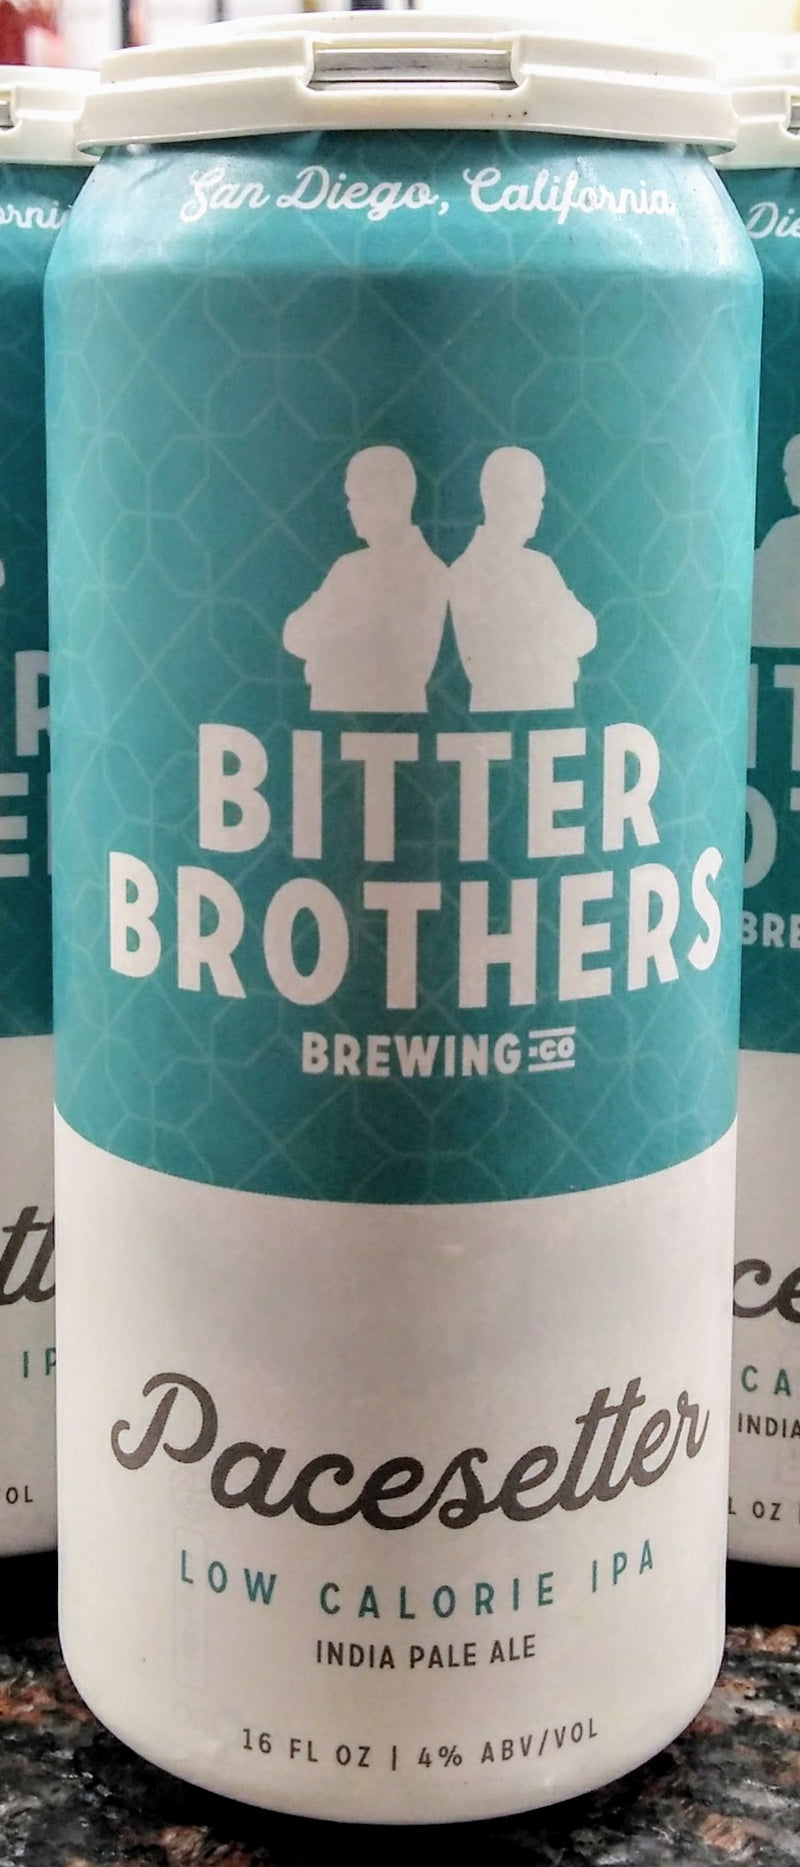 BITTER BROTHERS BREWING CO. PACE SETTER LOW CALORIE IPA 16oz can